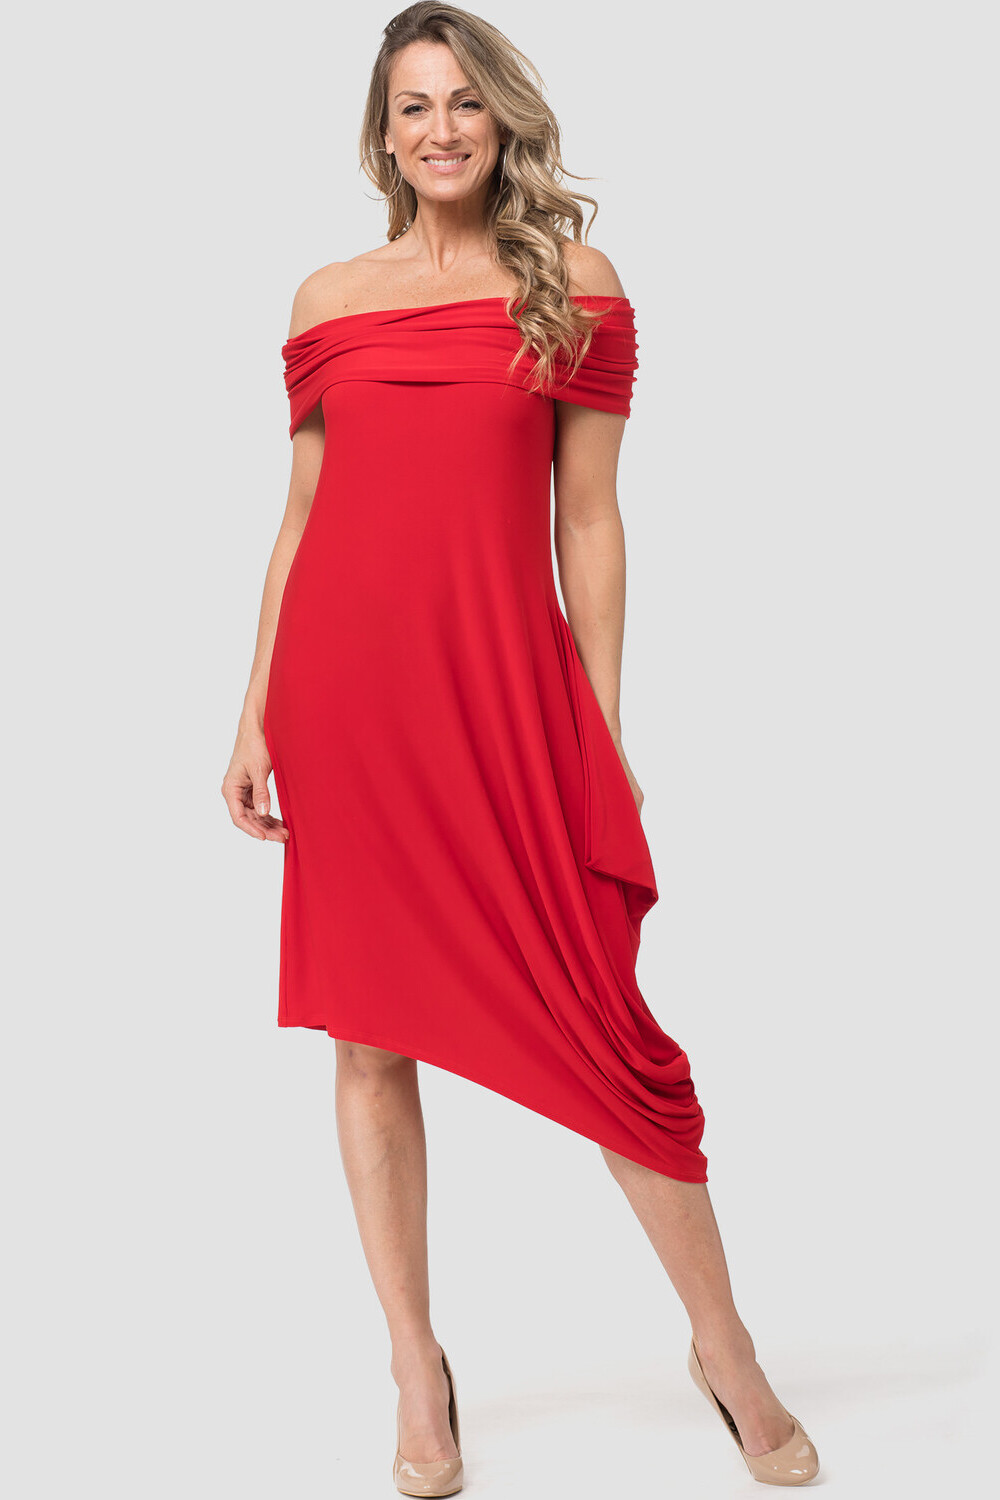 Joseph Ribkoff robe style 182027. Rouge A Levres 173